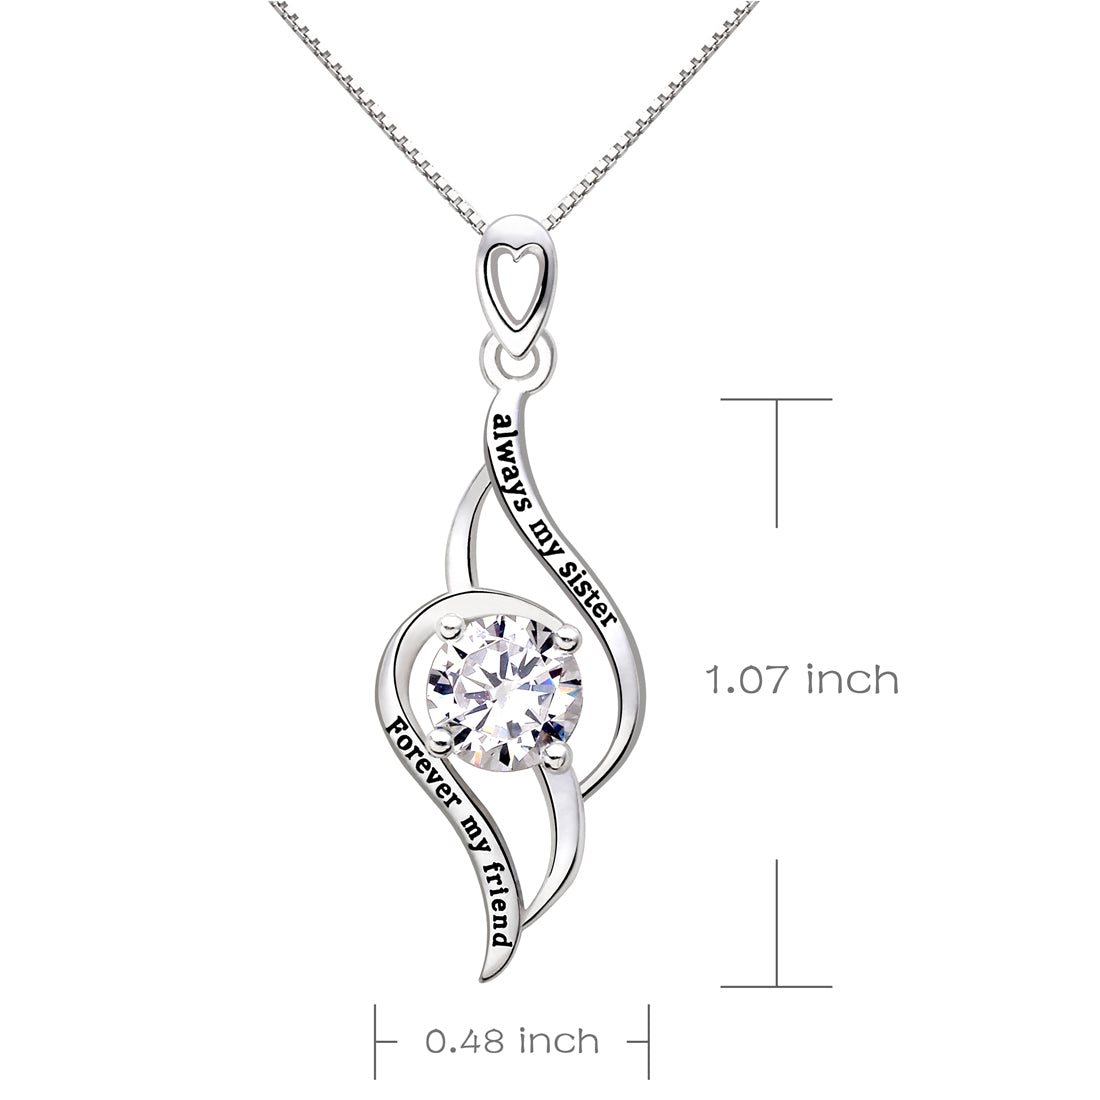 ALOV Jewelry Sterling Silver "always my sister Forever my friend" Love Cubic Zirconia Pendant Necklace